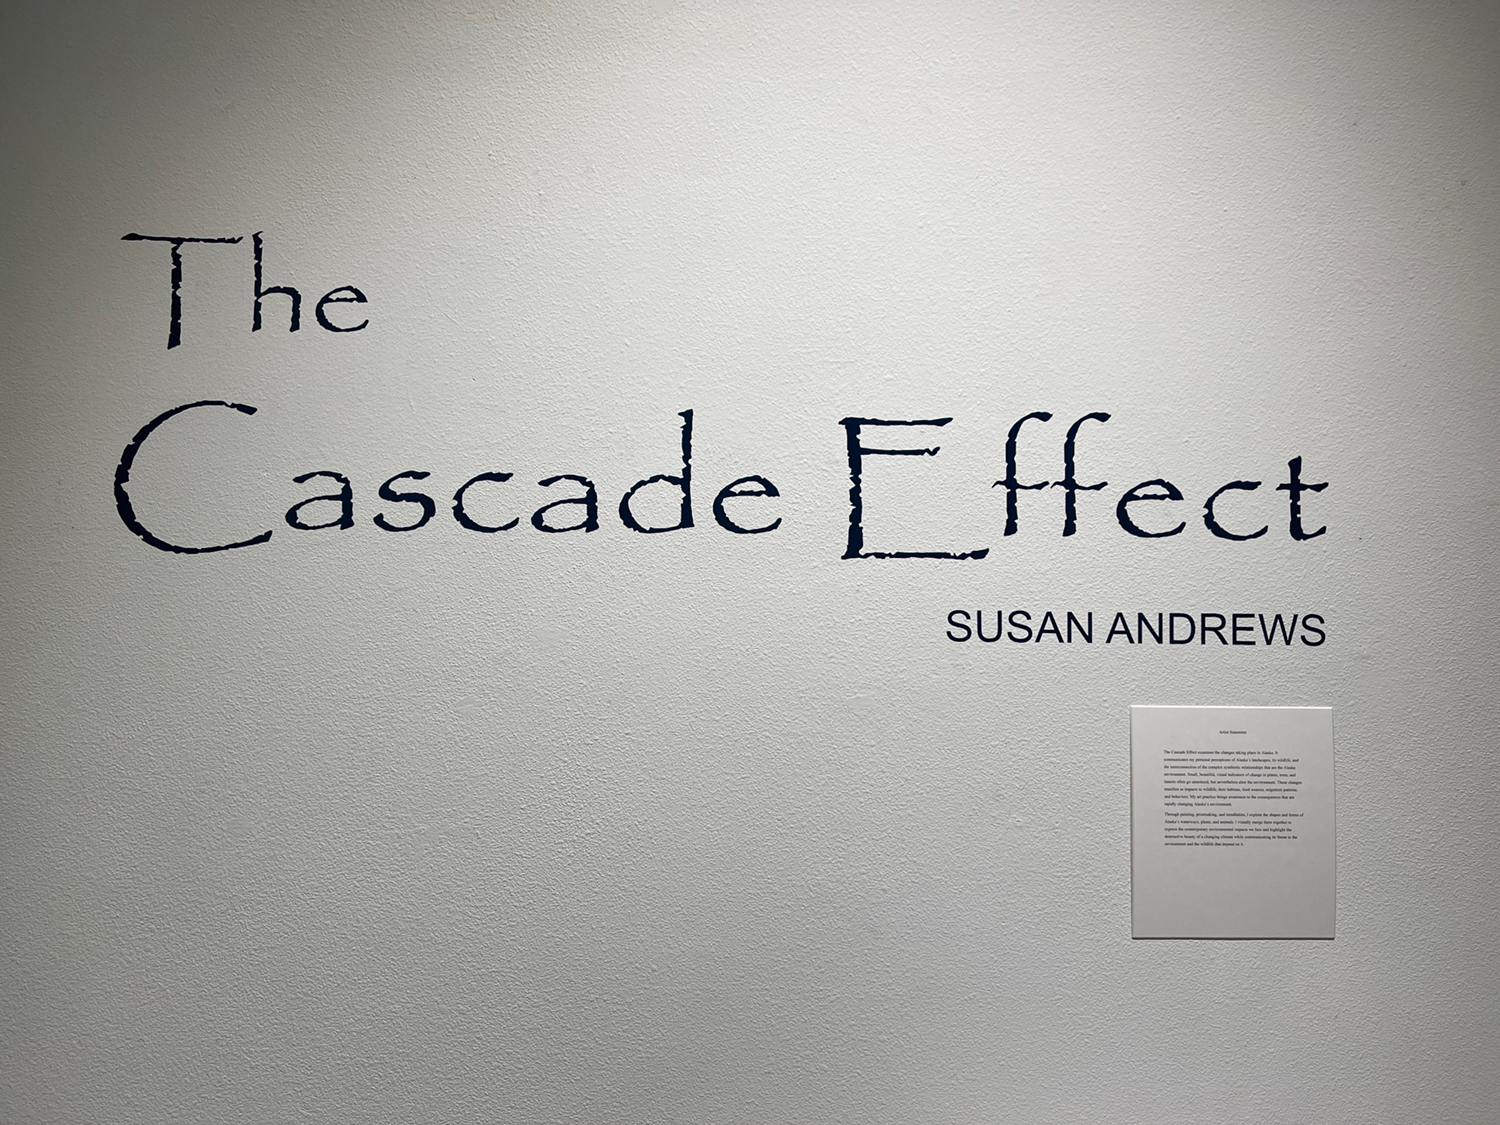 Title image from Susan Andrews' MFA exhibition, The Cascade Effect, held in the UAF Art Gallery. Image courtesy of the artist